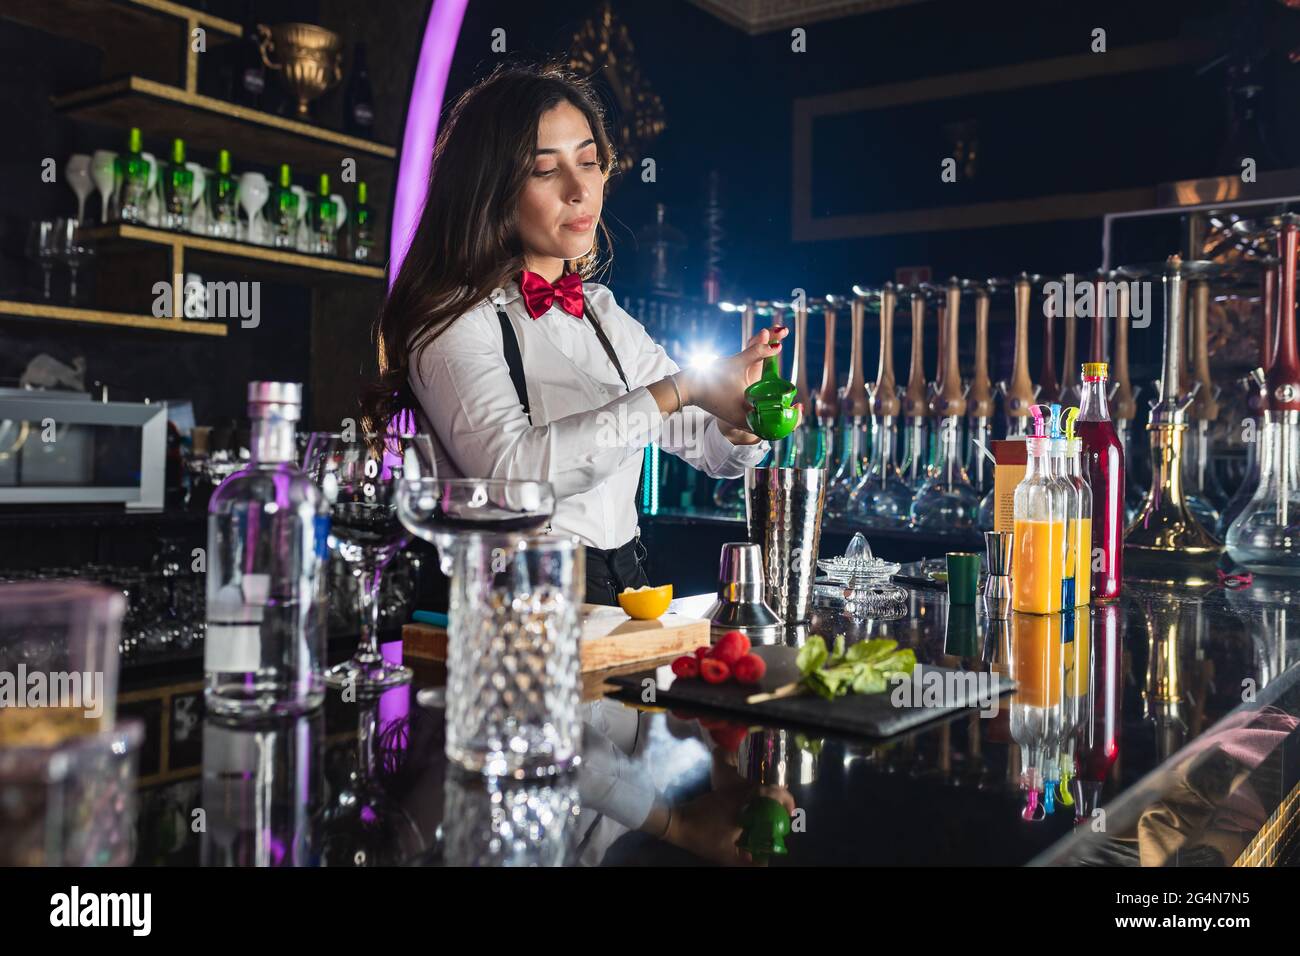 Young female barkeeper in stylish outfit squeezing lemon while preparing cocktail standing at counter in modern bar Stock Photo